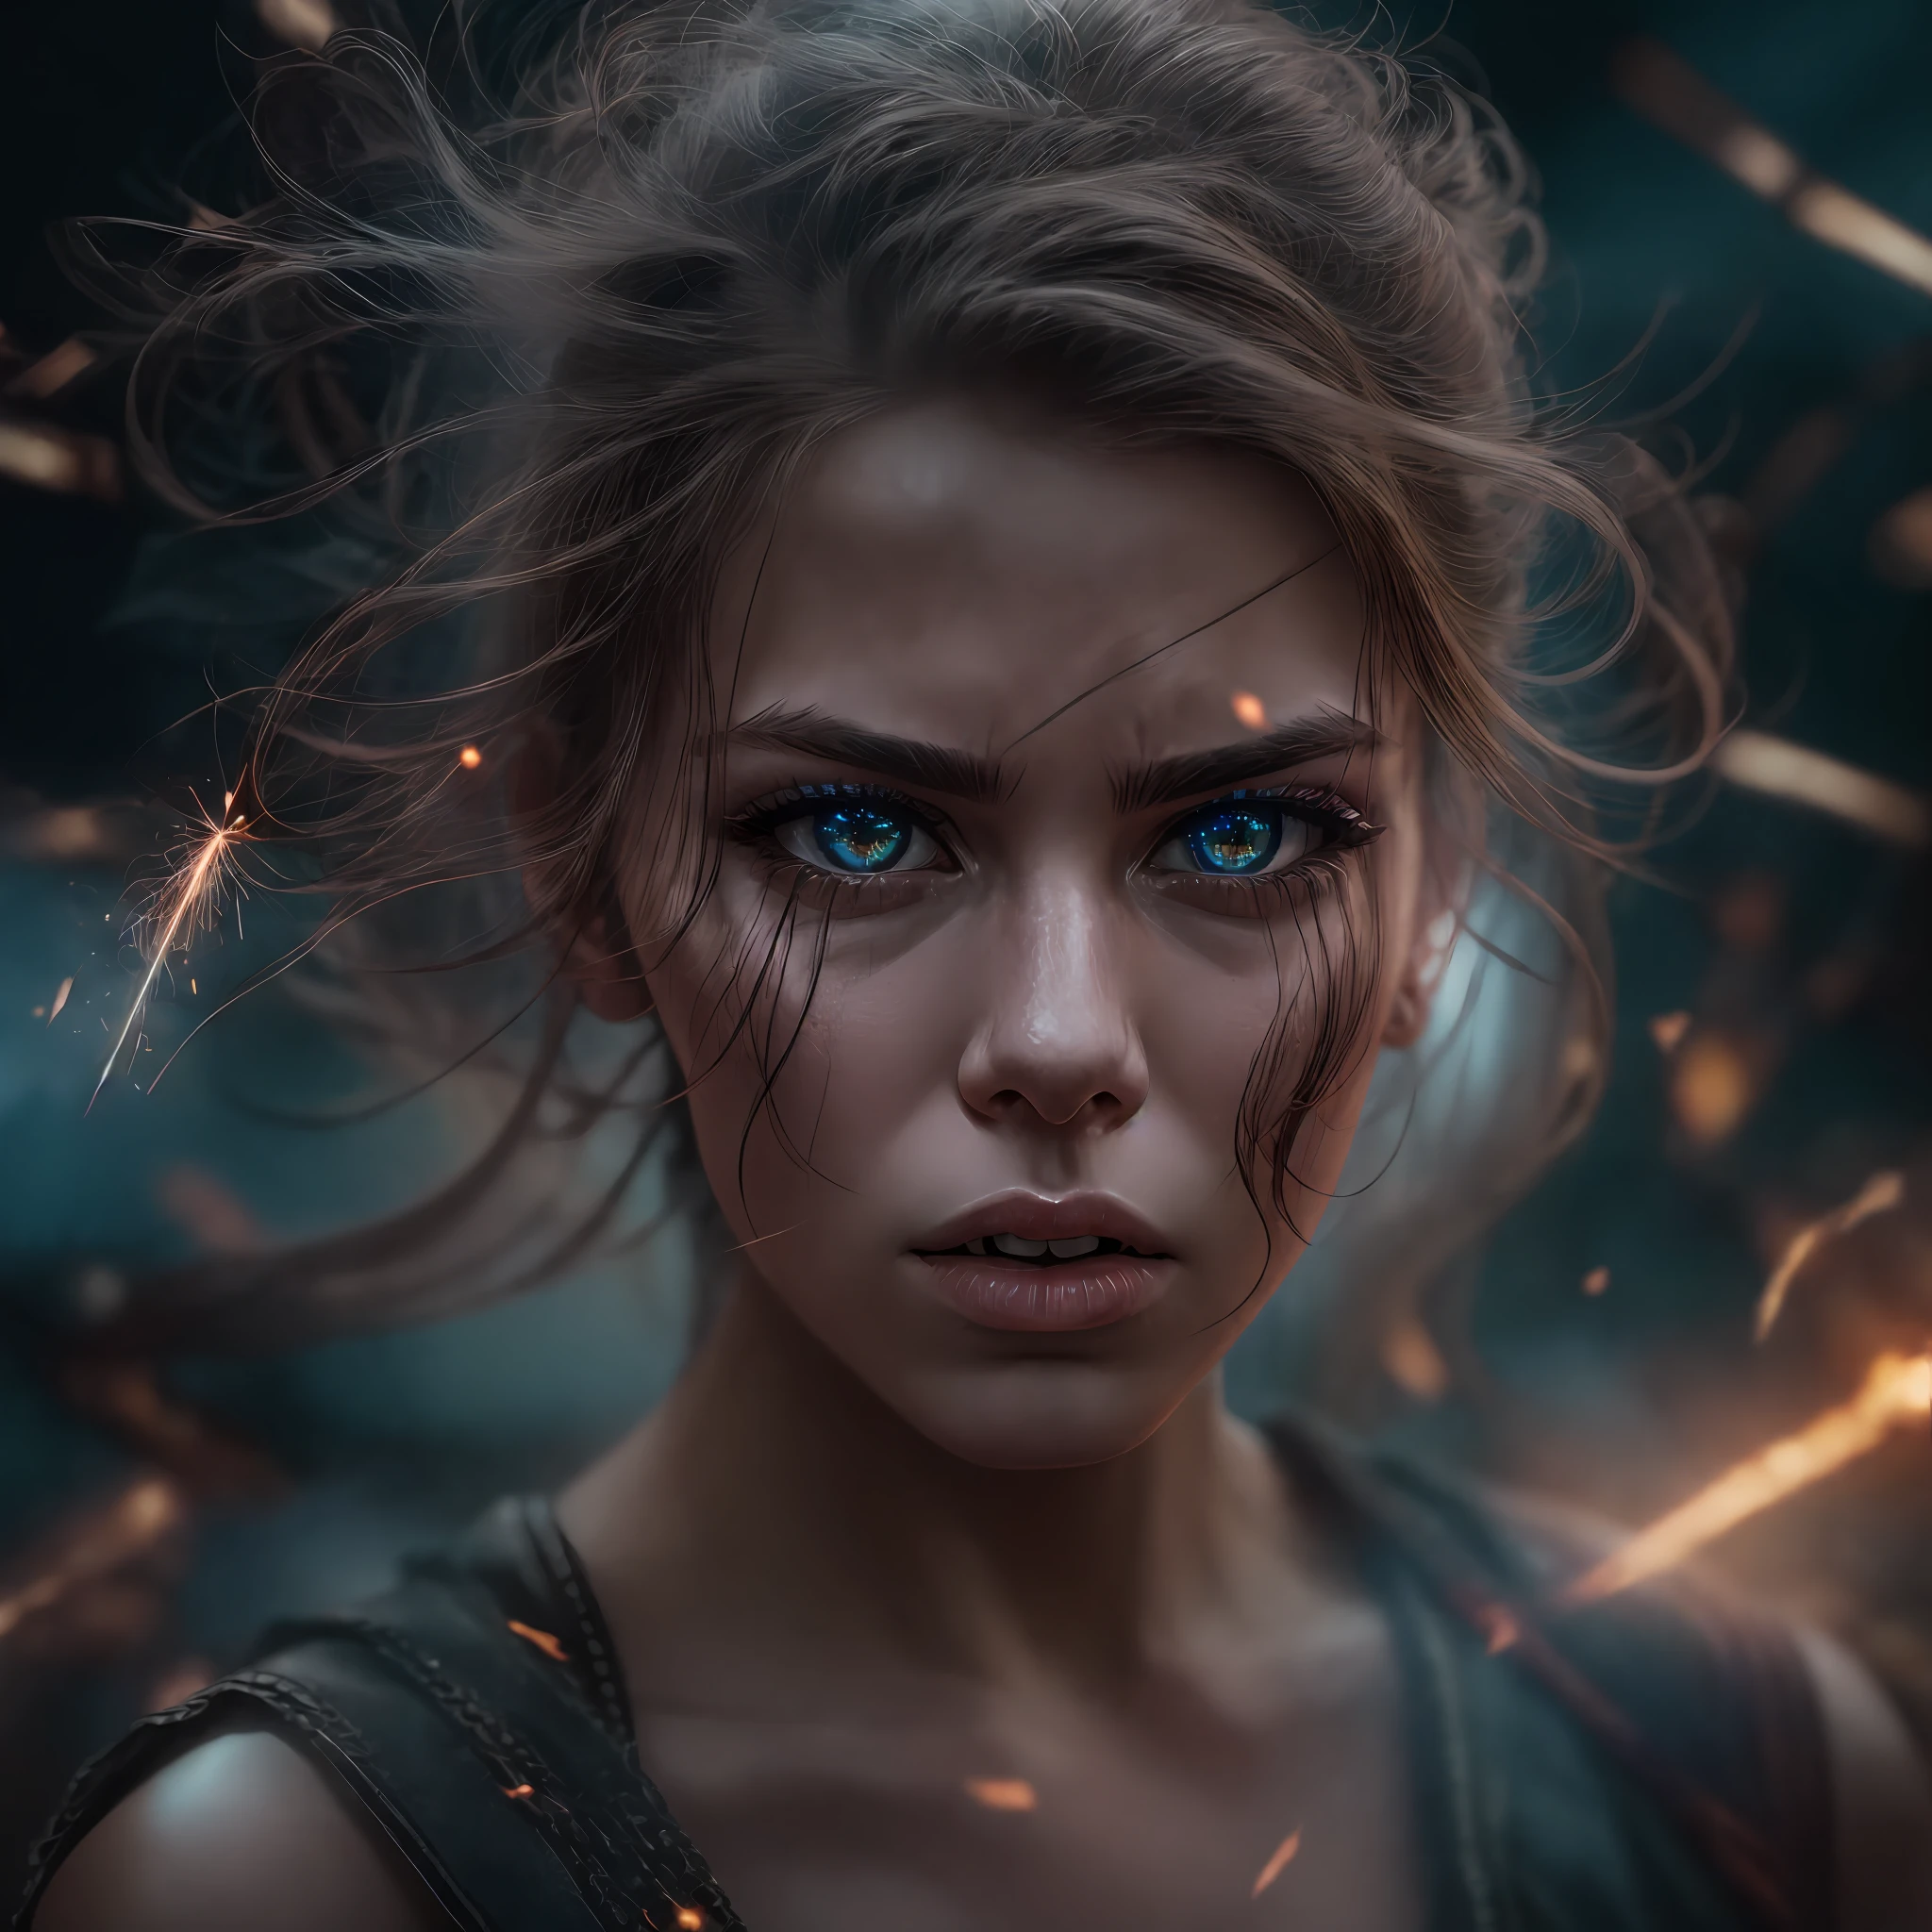 [1] = 1girl, fiercely determined, close up shot, stormy eyes, sparks flying / [2] = A close-up portrait of a determined young woman, her face contorted with determination, her eyes glowing with fiery intensity as sparks fly around her. / [3] = Set in a post-apocalyptic cityscape, dark and desolate, with remnants of a once bustling civilization. / [4] = The atmosphere is charged with tension and anticipation, as if a pivotal moment in a fierce battle is about to unfold. / [5] = Photography / [6] = Shot with a high-speed camera to capture the dynamic sparks, using a wide aperture lens to create a shallow depth of field and focus on the girl's intense expression.